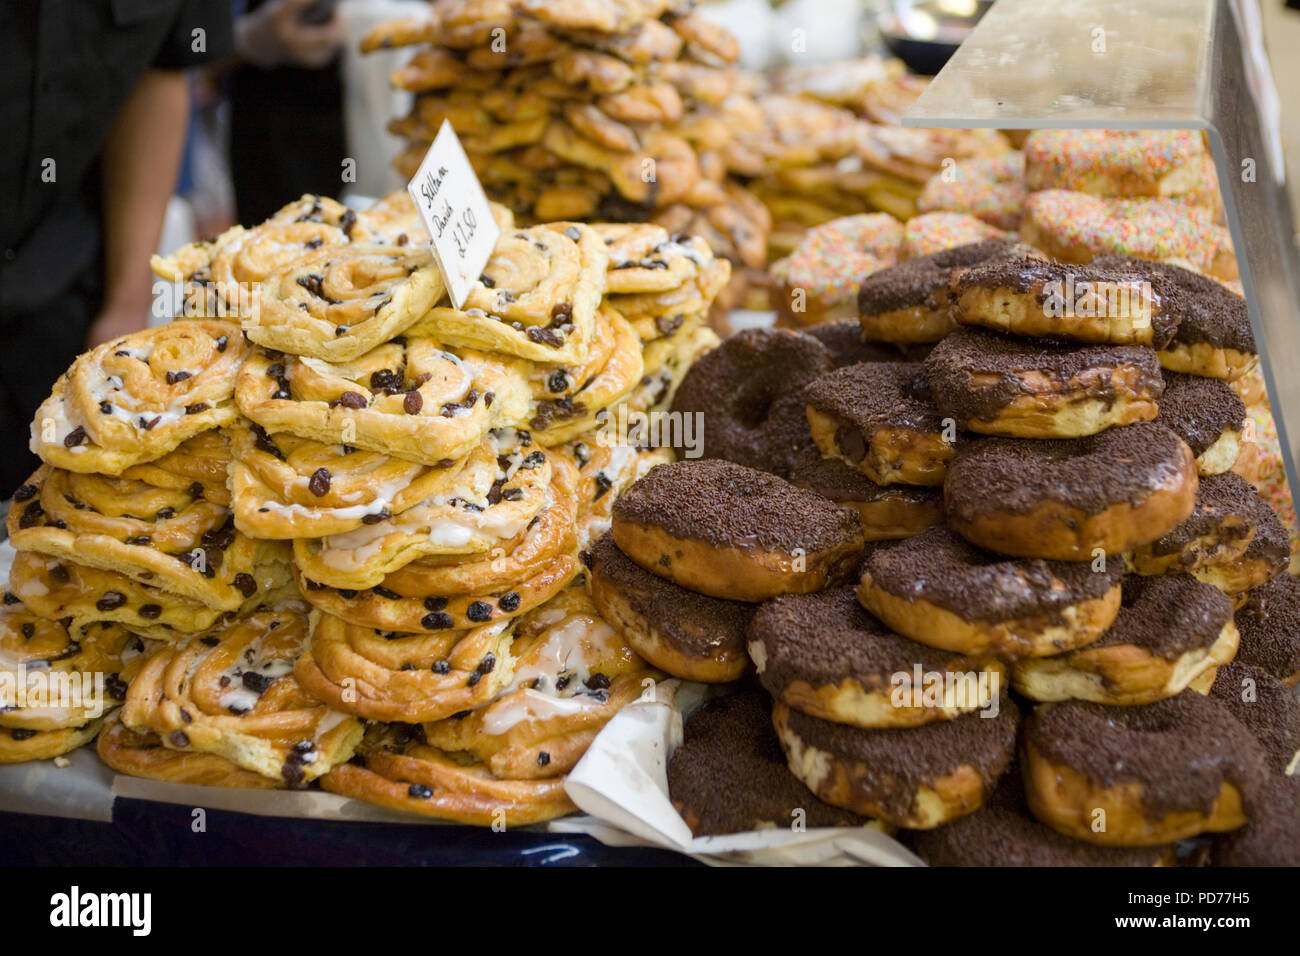 Pastries for sale Stock Photo